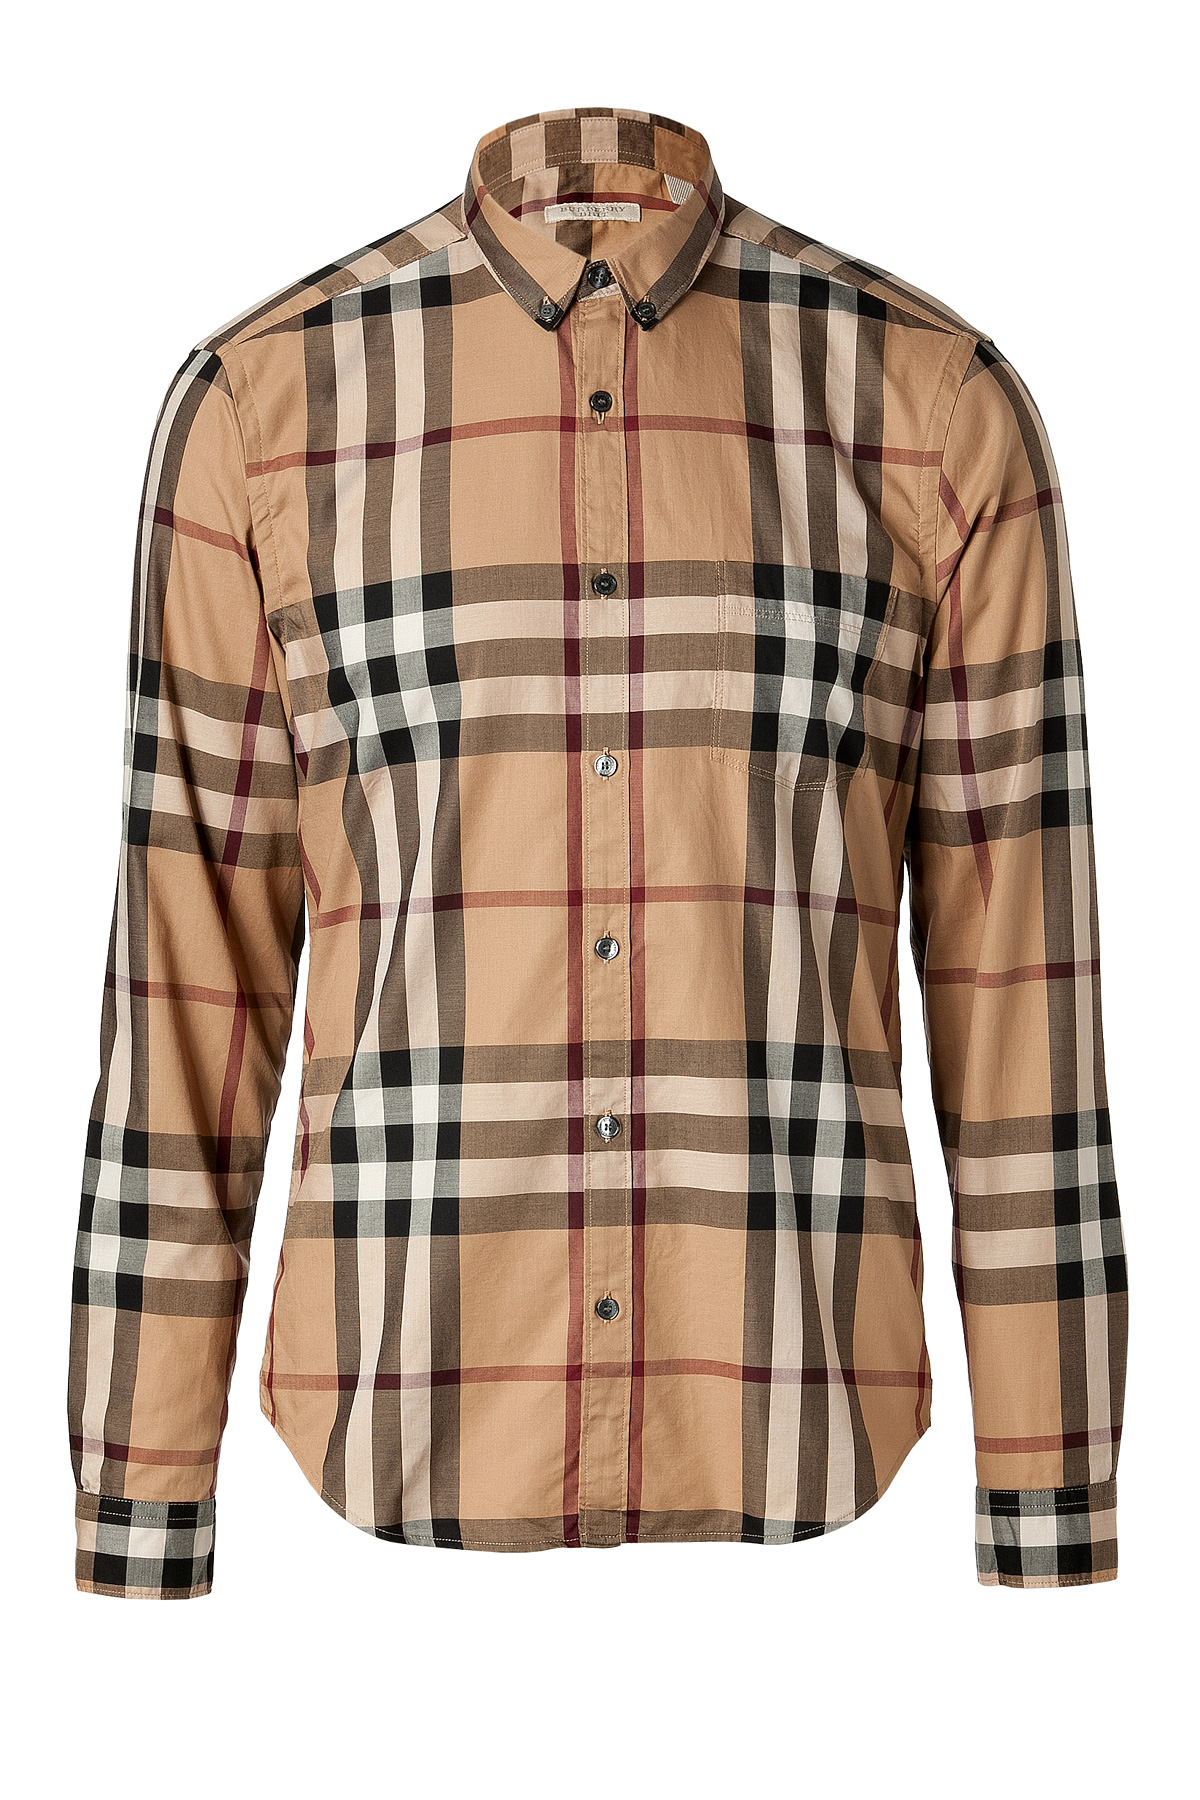 Lyst - Burberry Brit Cotton Niall Shirt in Camel in Natural for Men